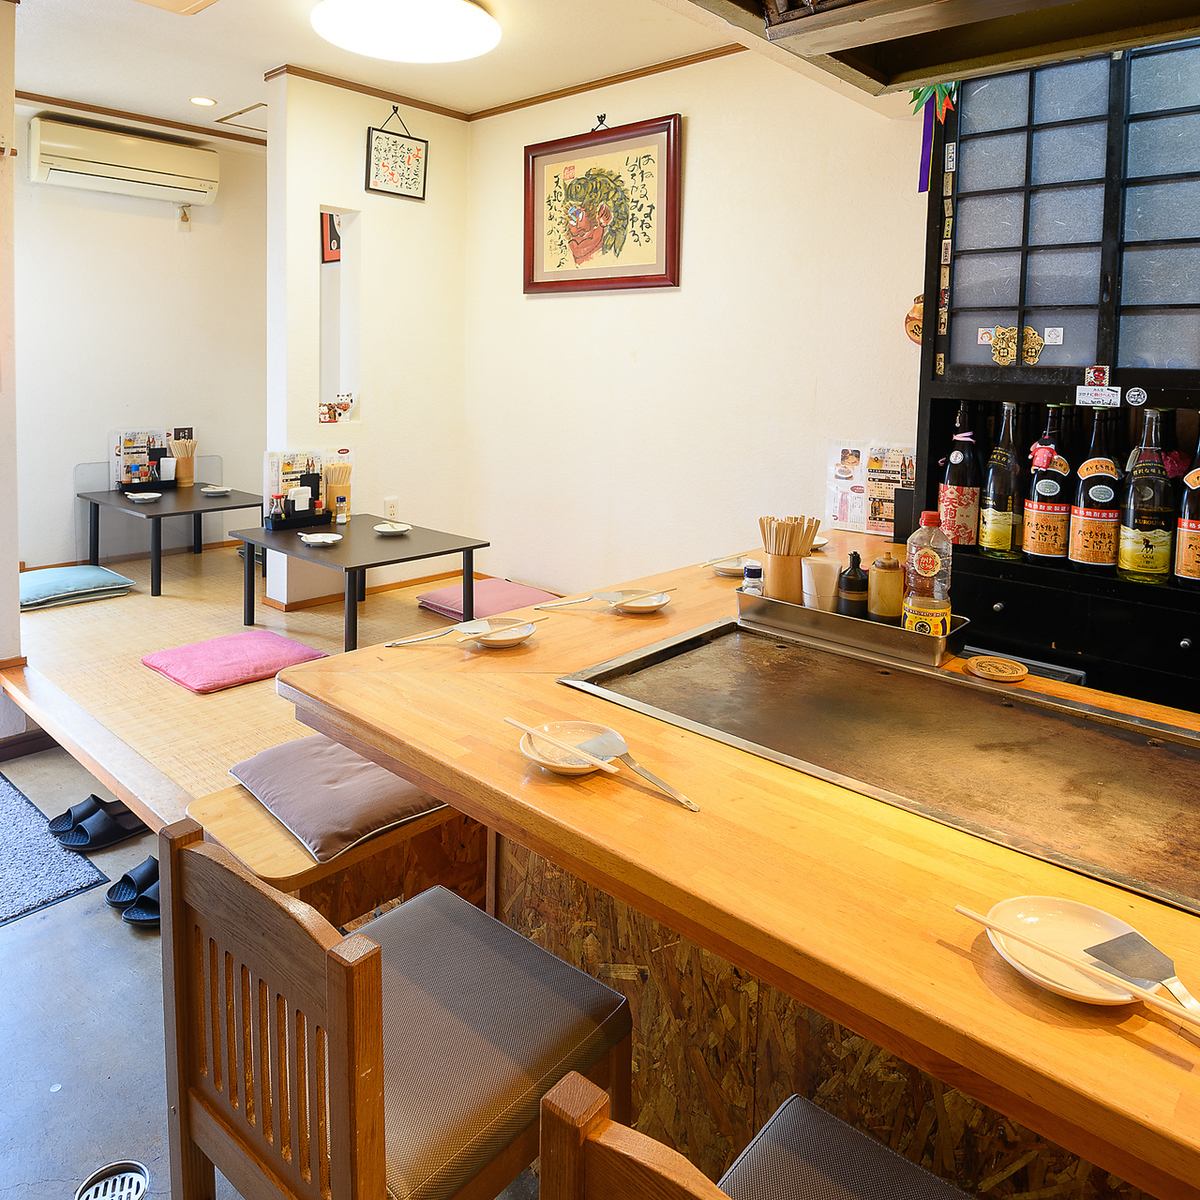 There are tatami seats where you can relax.The homey atmosphere is appealing.